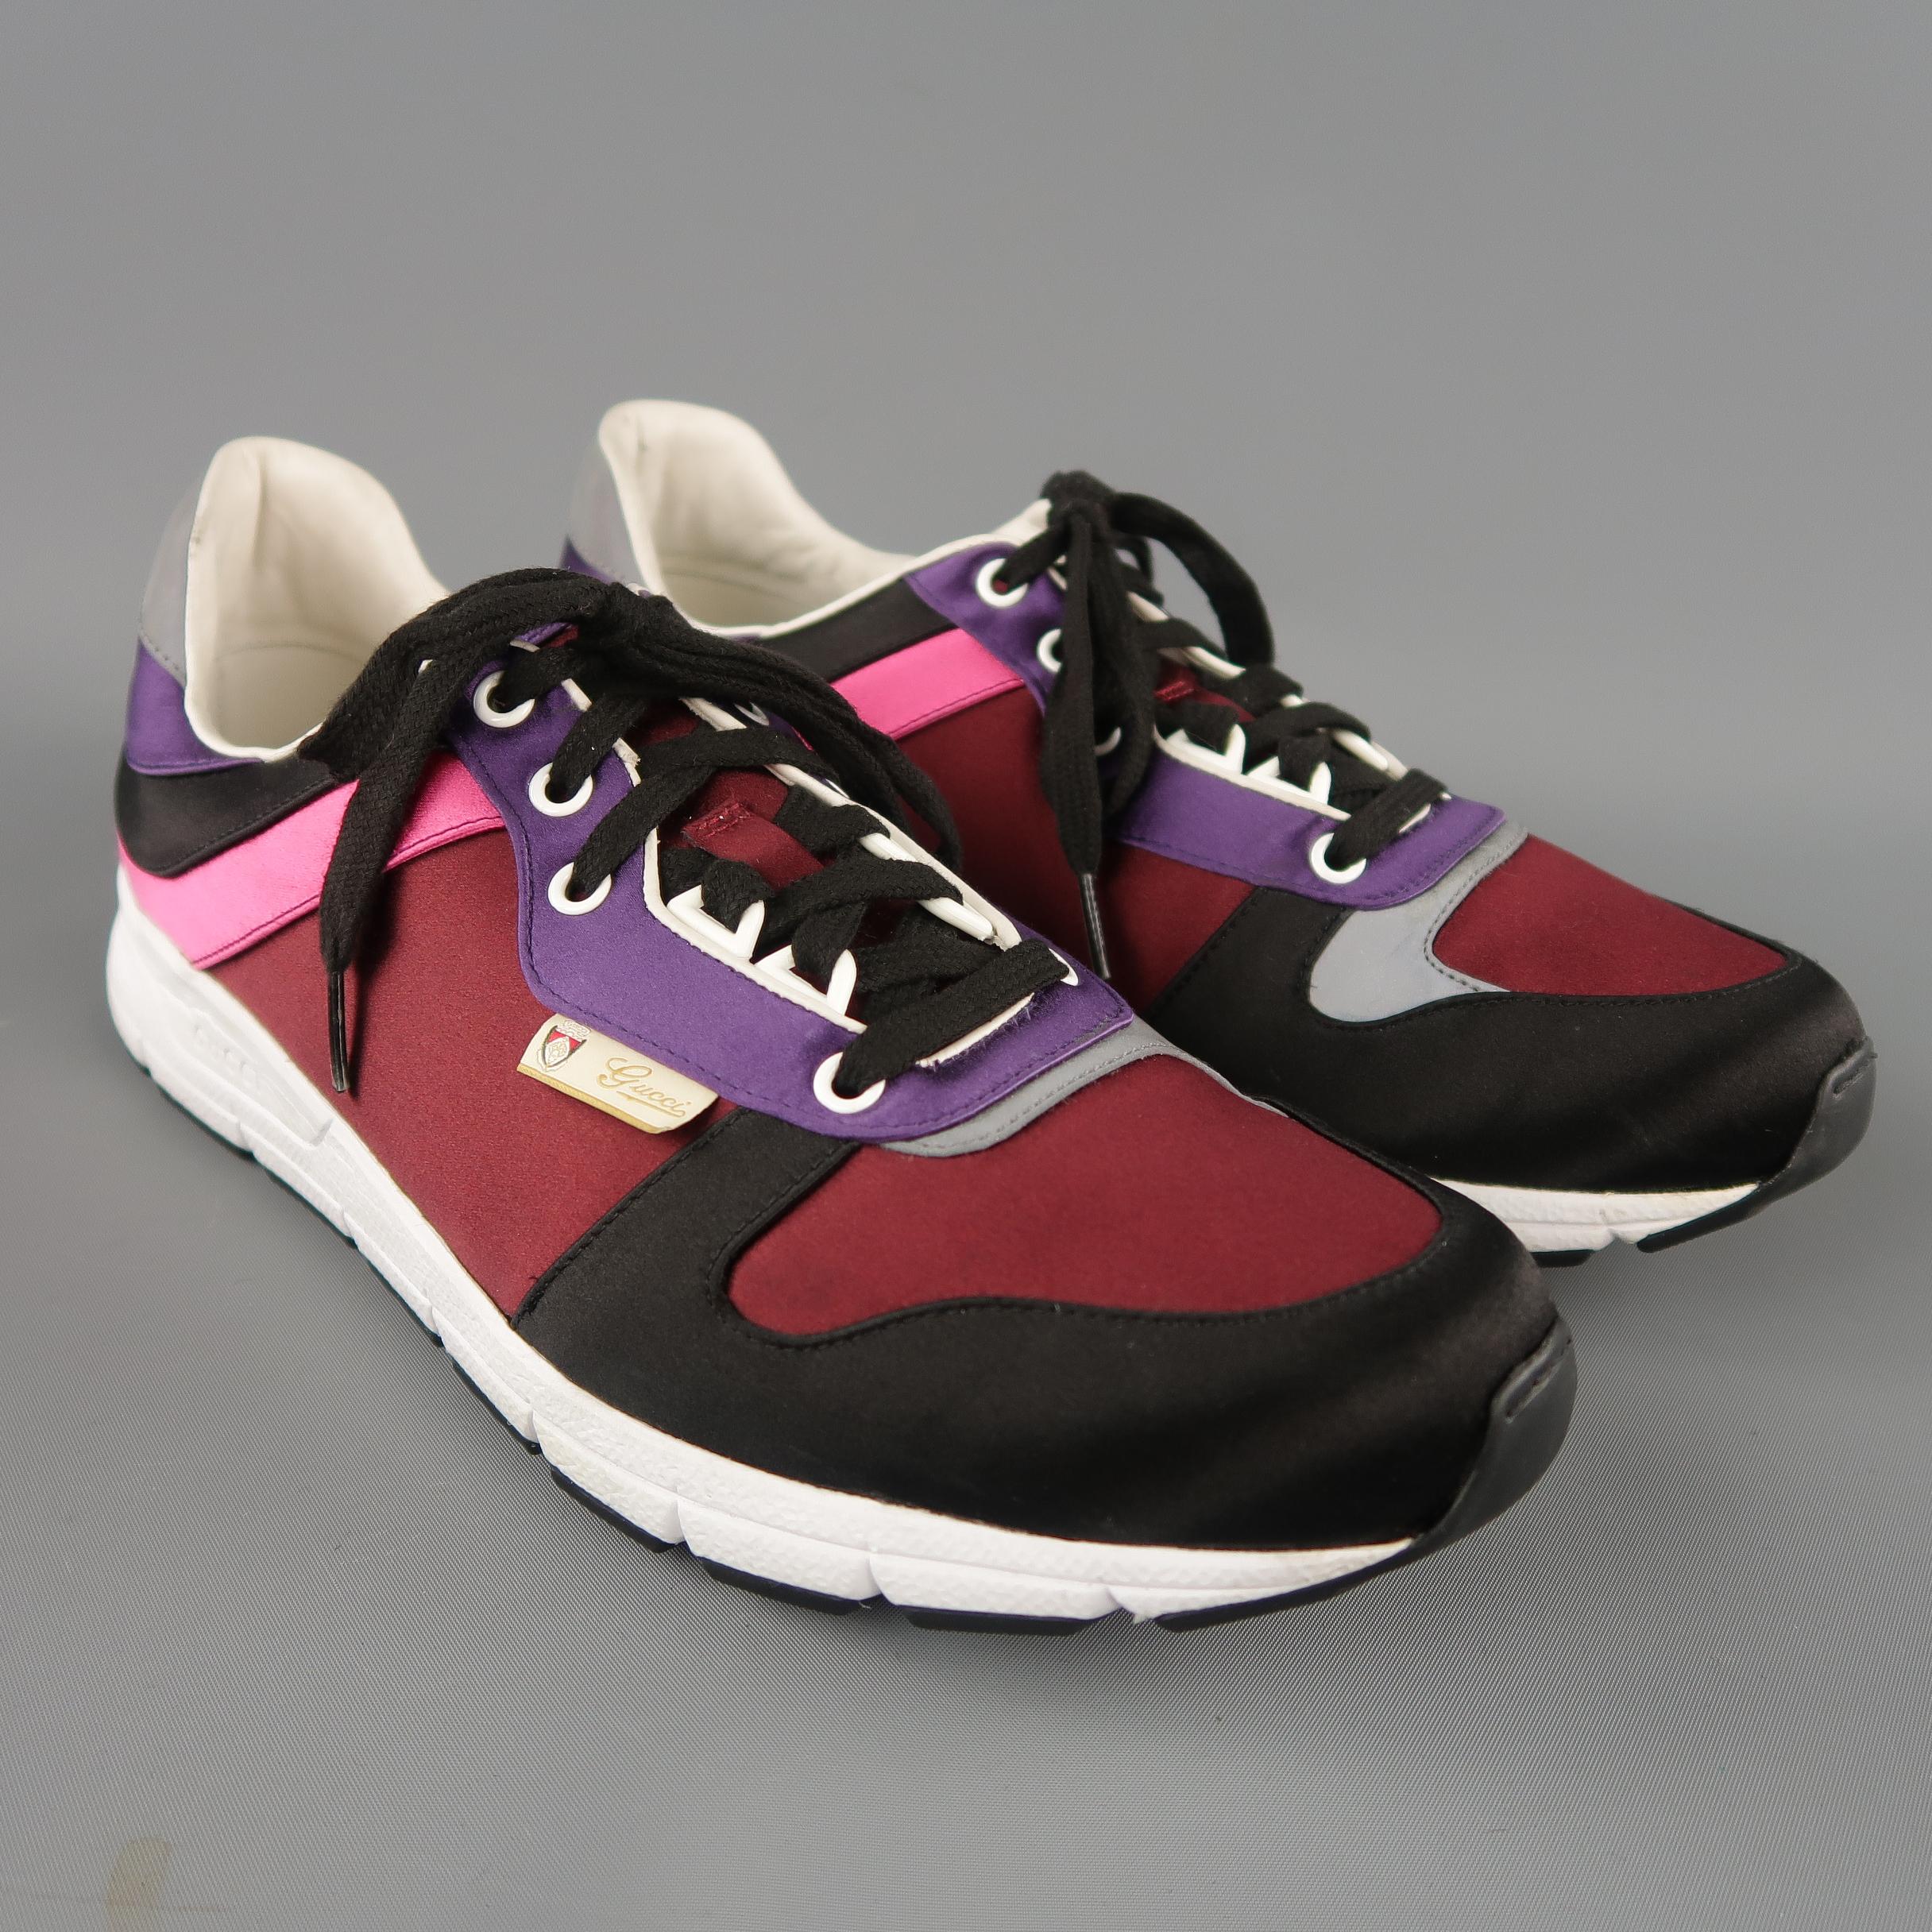 GUCCI Ipanema sneakers come in burgundy  and black satin with a pink and purple striped side, reflective heel panel, and white rubber sole. Made in Italy.
 
Excellent Pre-Owned Condition.
Marked: UK 10
 
Outsole: 12.25 x 4 in.